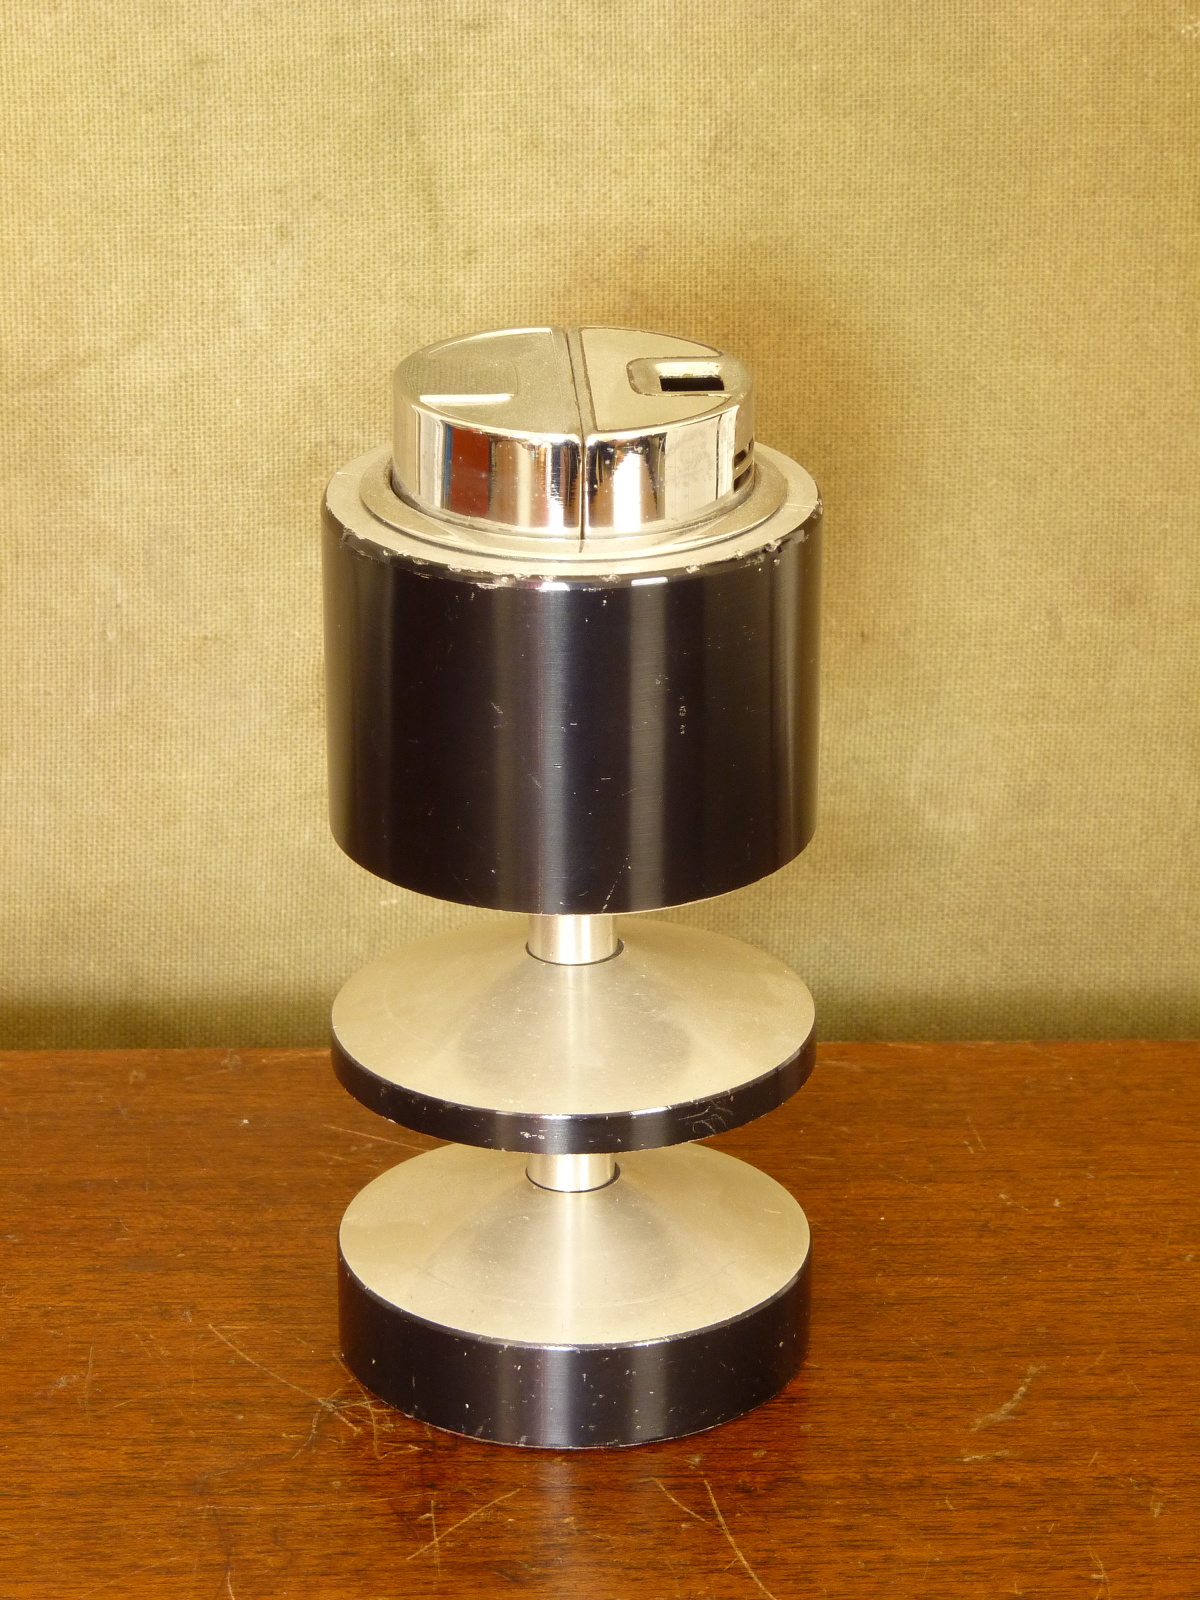 Ripples erosion Omkreds Vintage Sarome "Tabic" Table Lighter in Black, Aluminium and Chrome, 1960s  - Anything In Particular